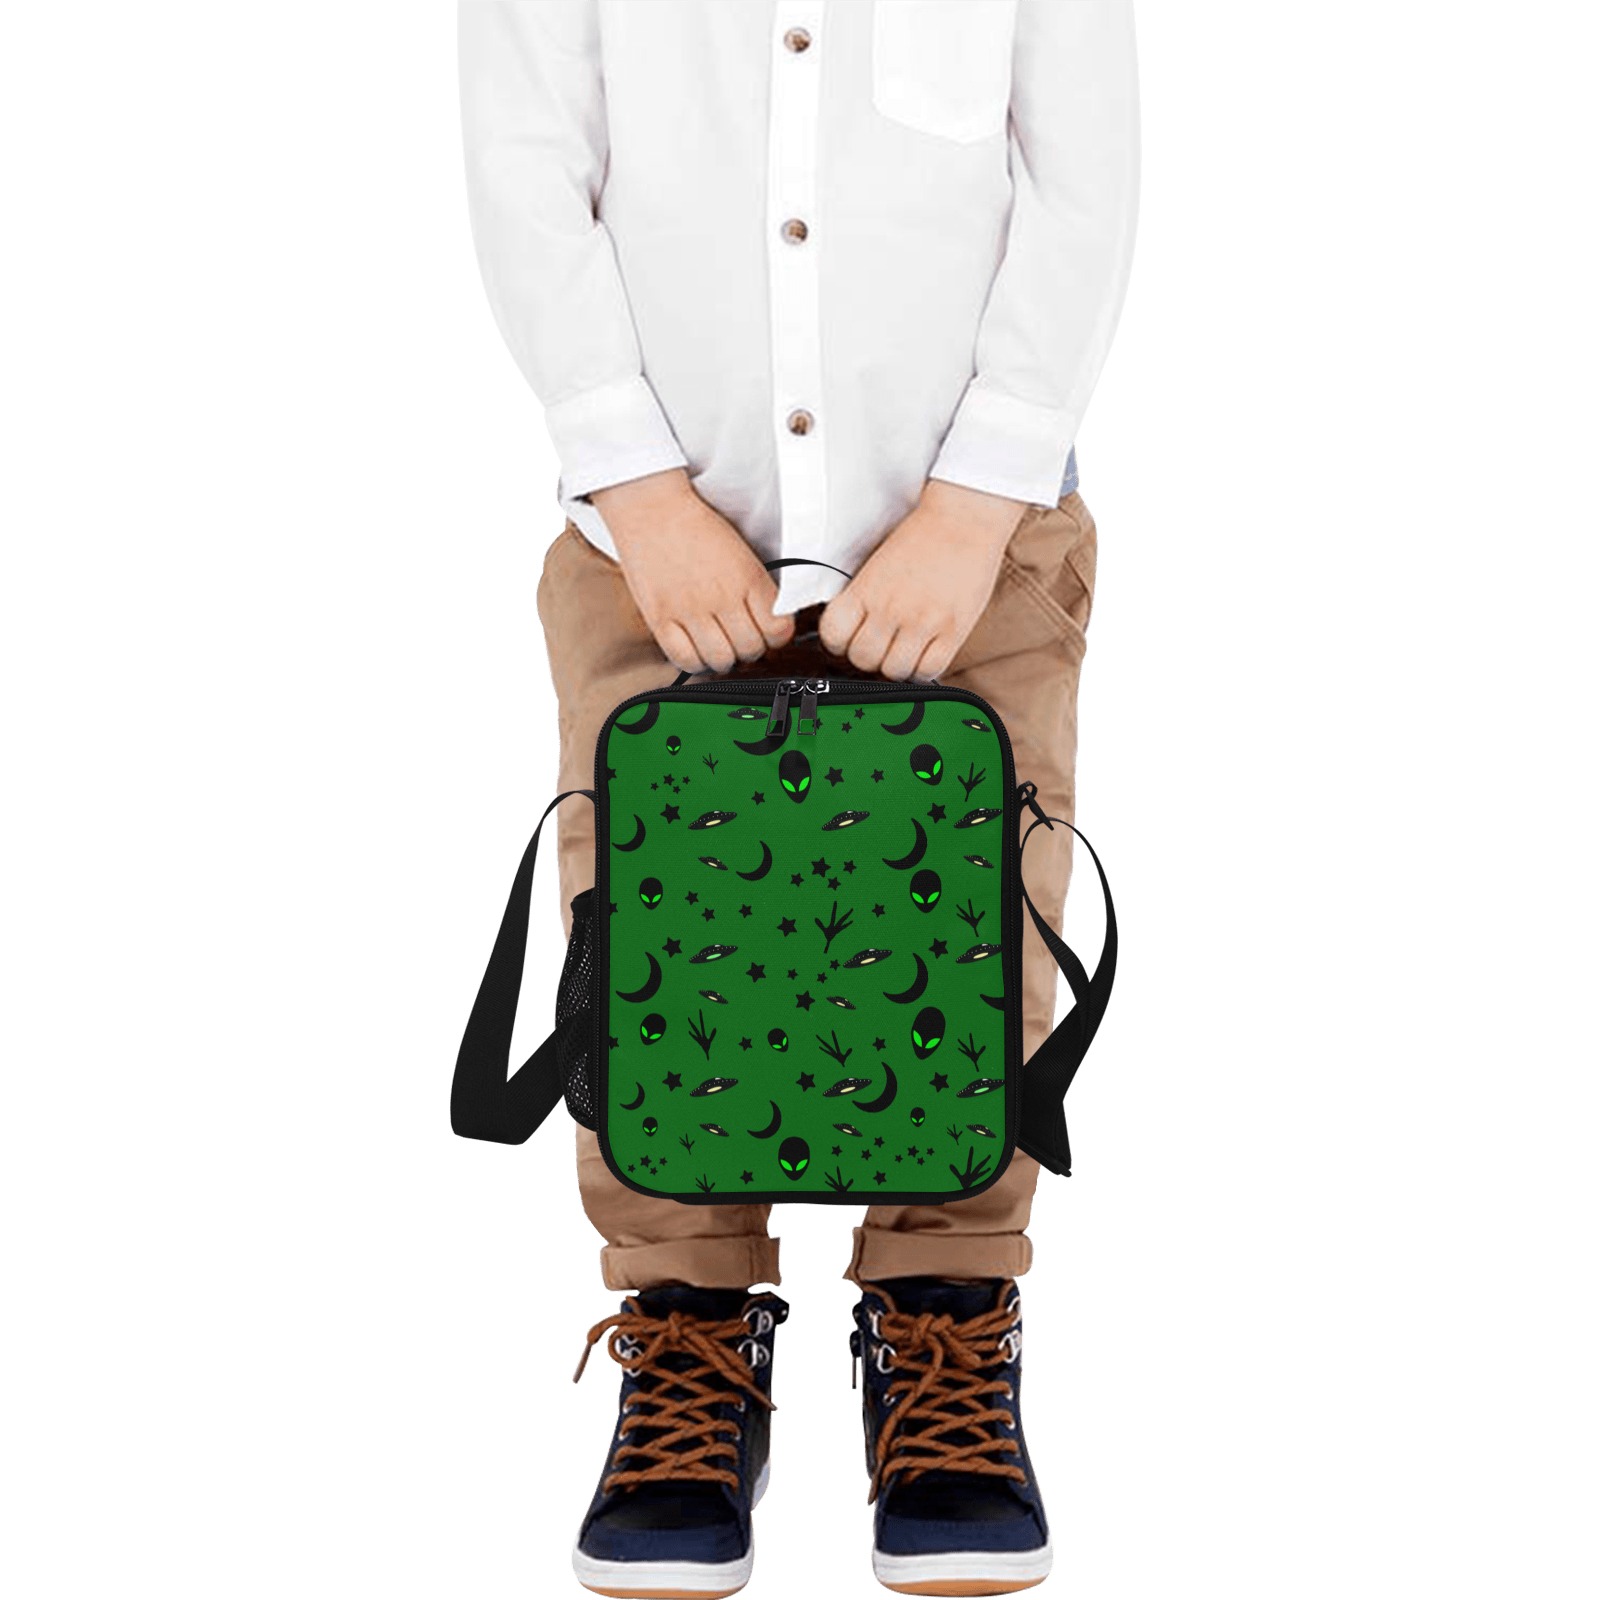 Aliens and Spaceships - Green Crossbody Lunch Bag for Kids (Model 1722)